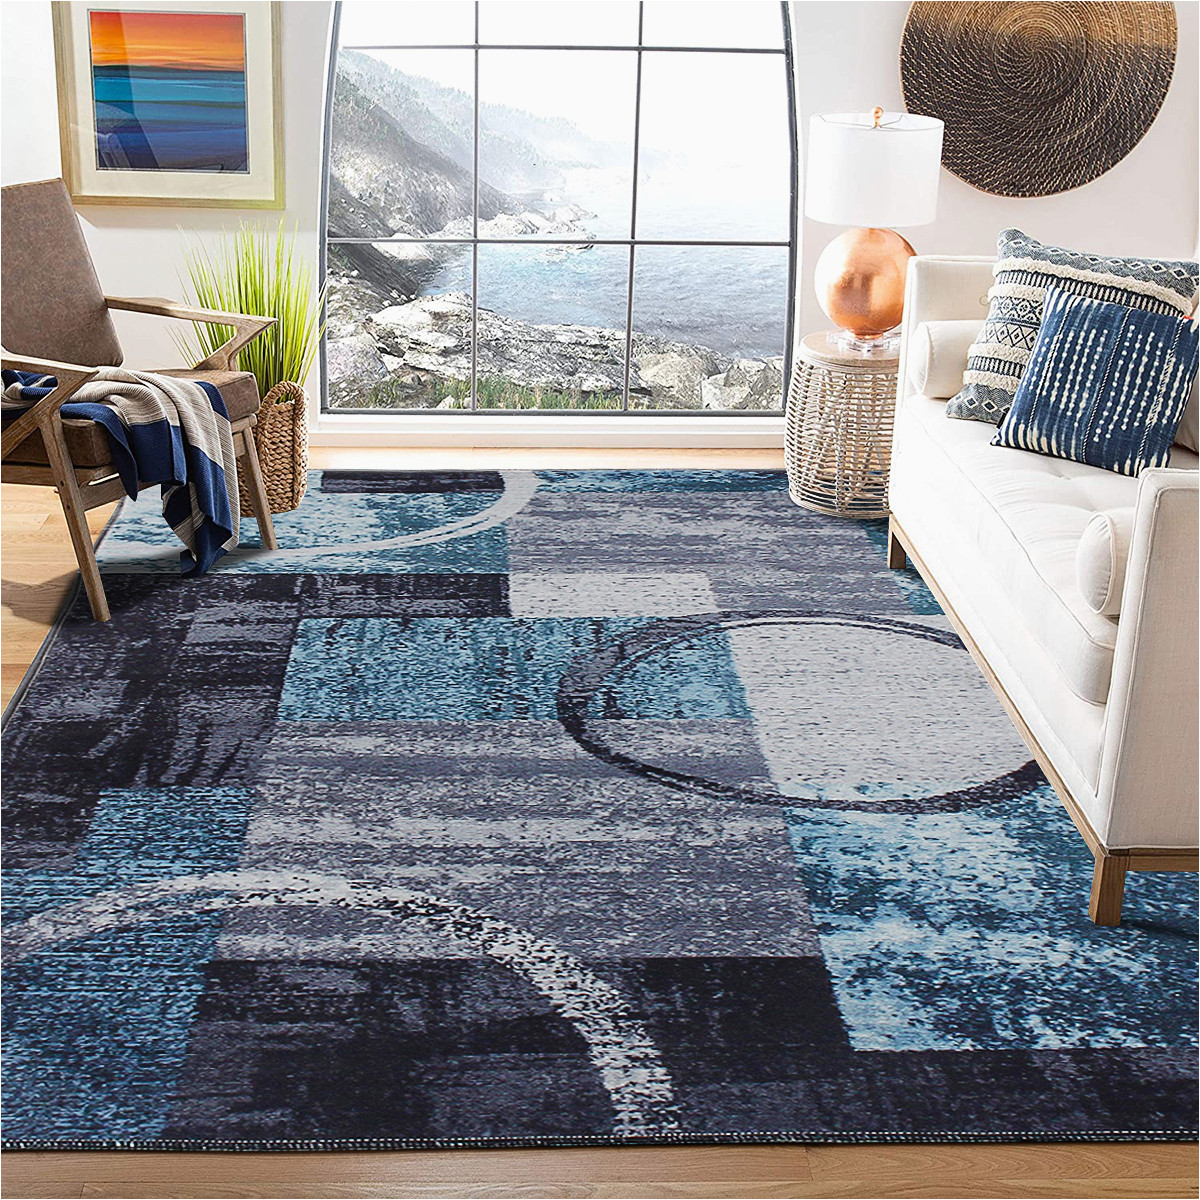 Contemporary Living Room area Rugs Large Modern area Rugs for Living Room In Home, Floor Carpet Mat, Bedroom Dining Room Home Decor Rugs